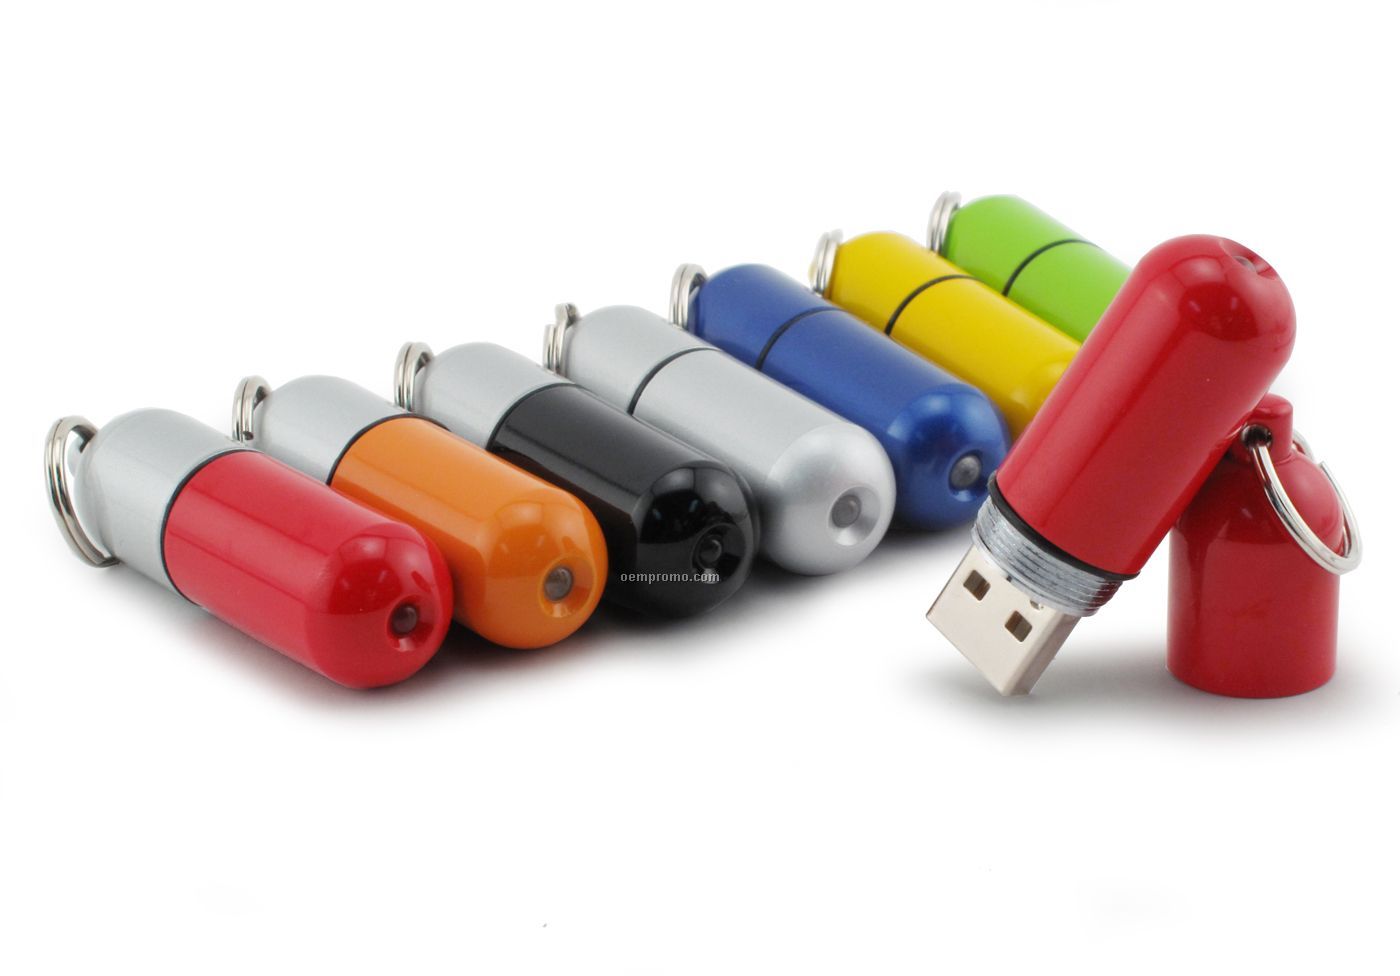 4 Gb Specialty 300 Series USB Drive - Capsule